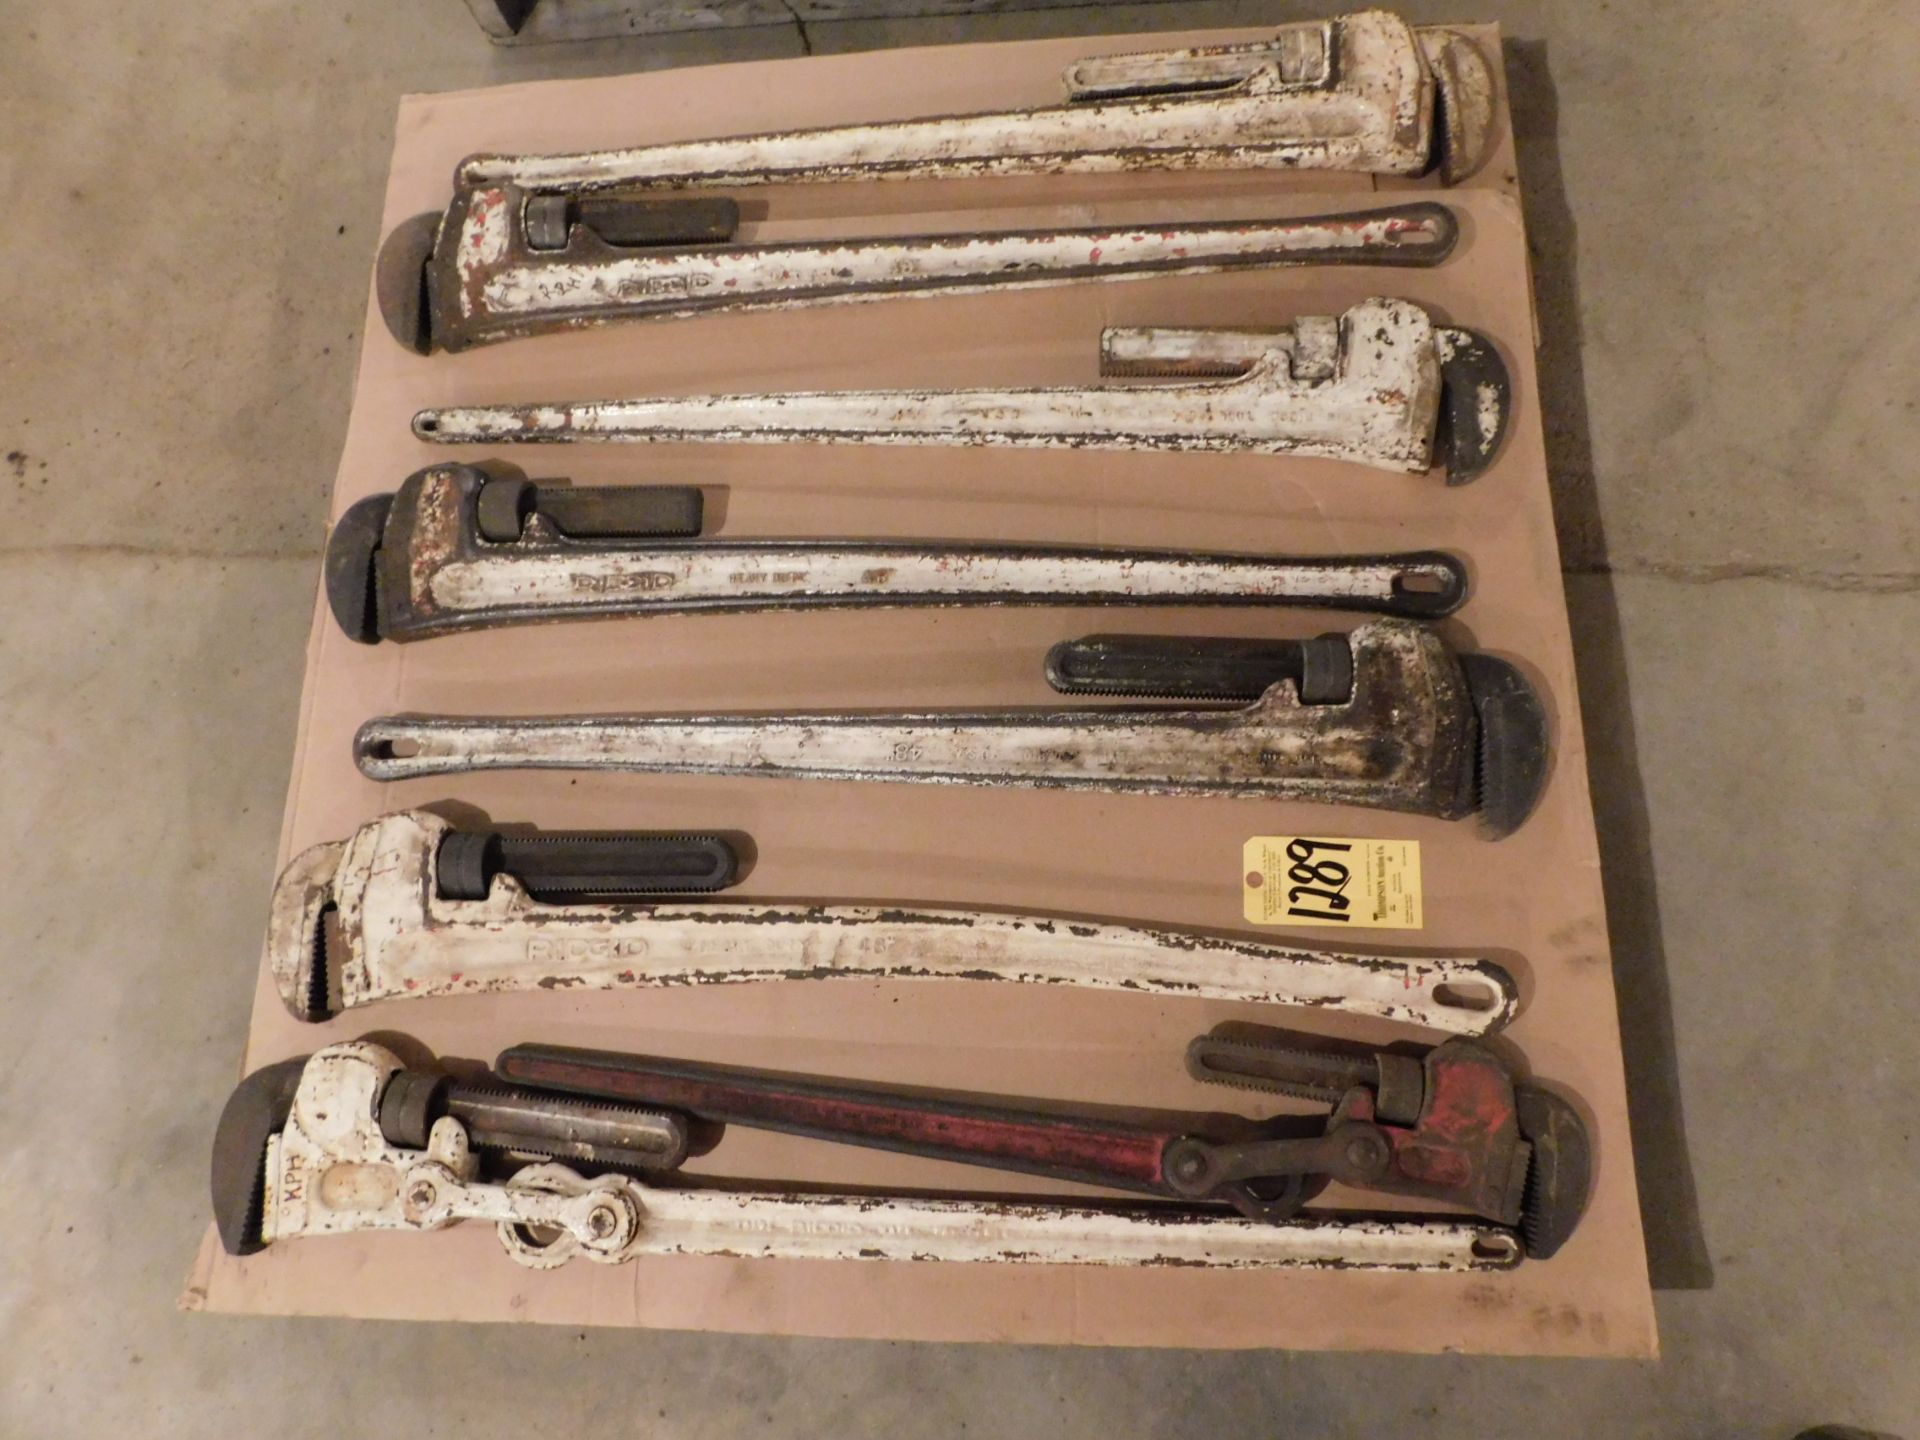 (7) Ridgid 48" Pipe Wrenches-Skid Lot